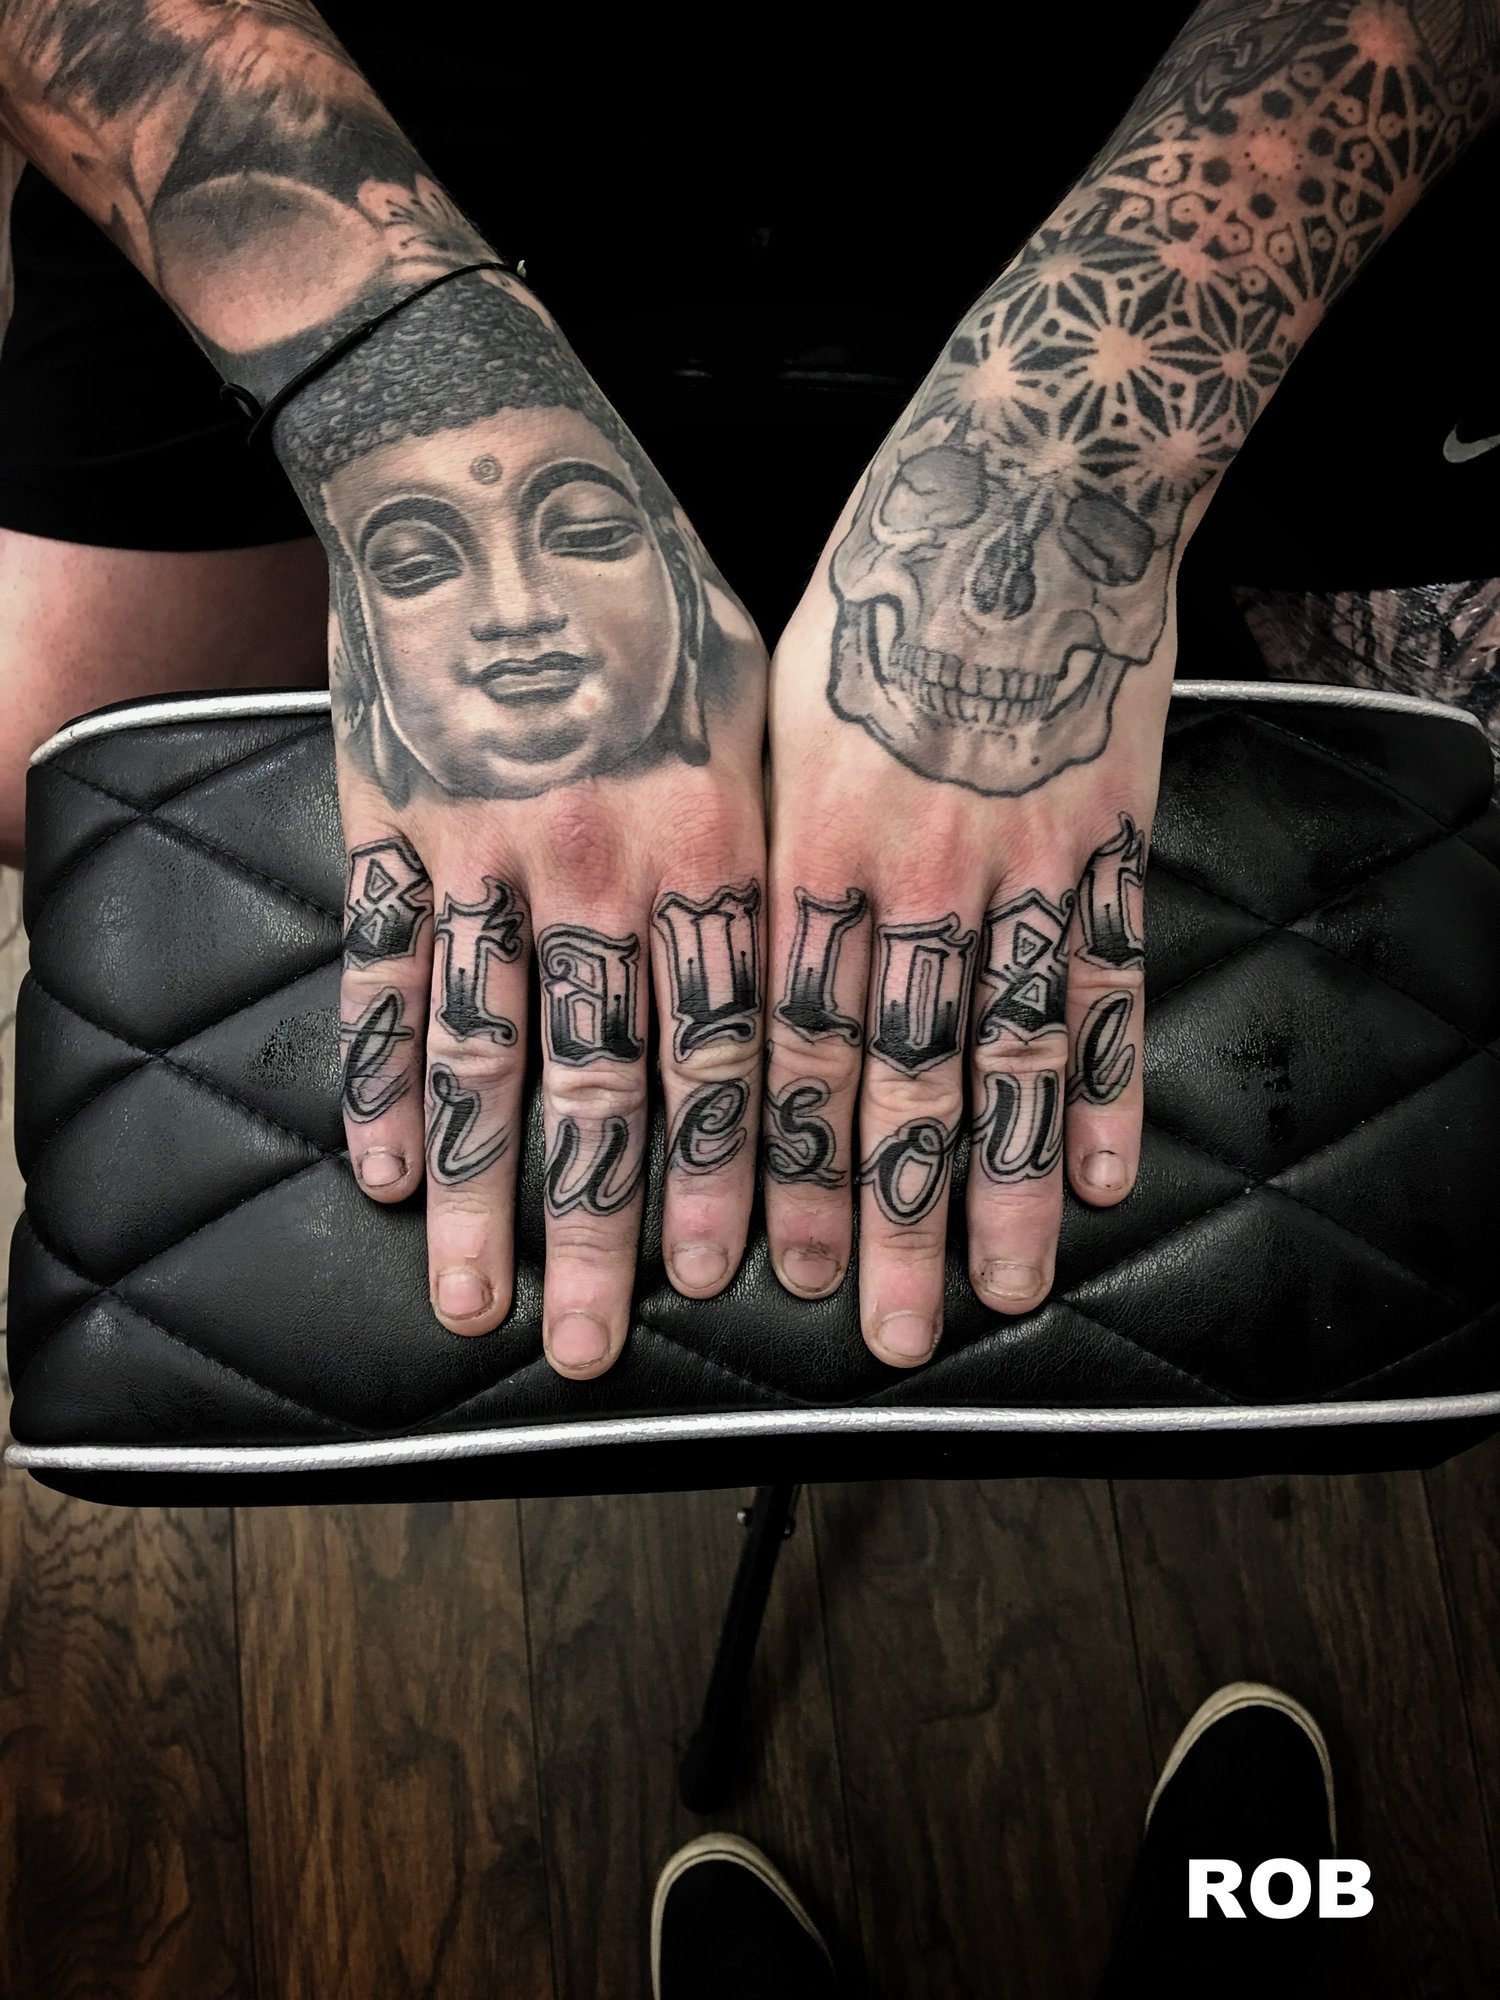 Tattoos by Soap and Rob — LAB MONKEY TATTOO